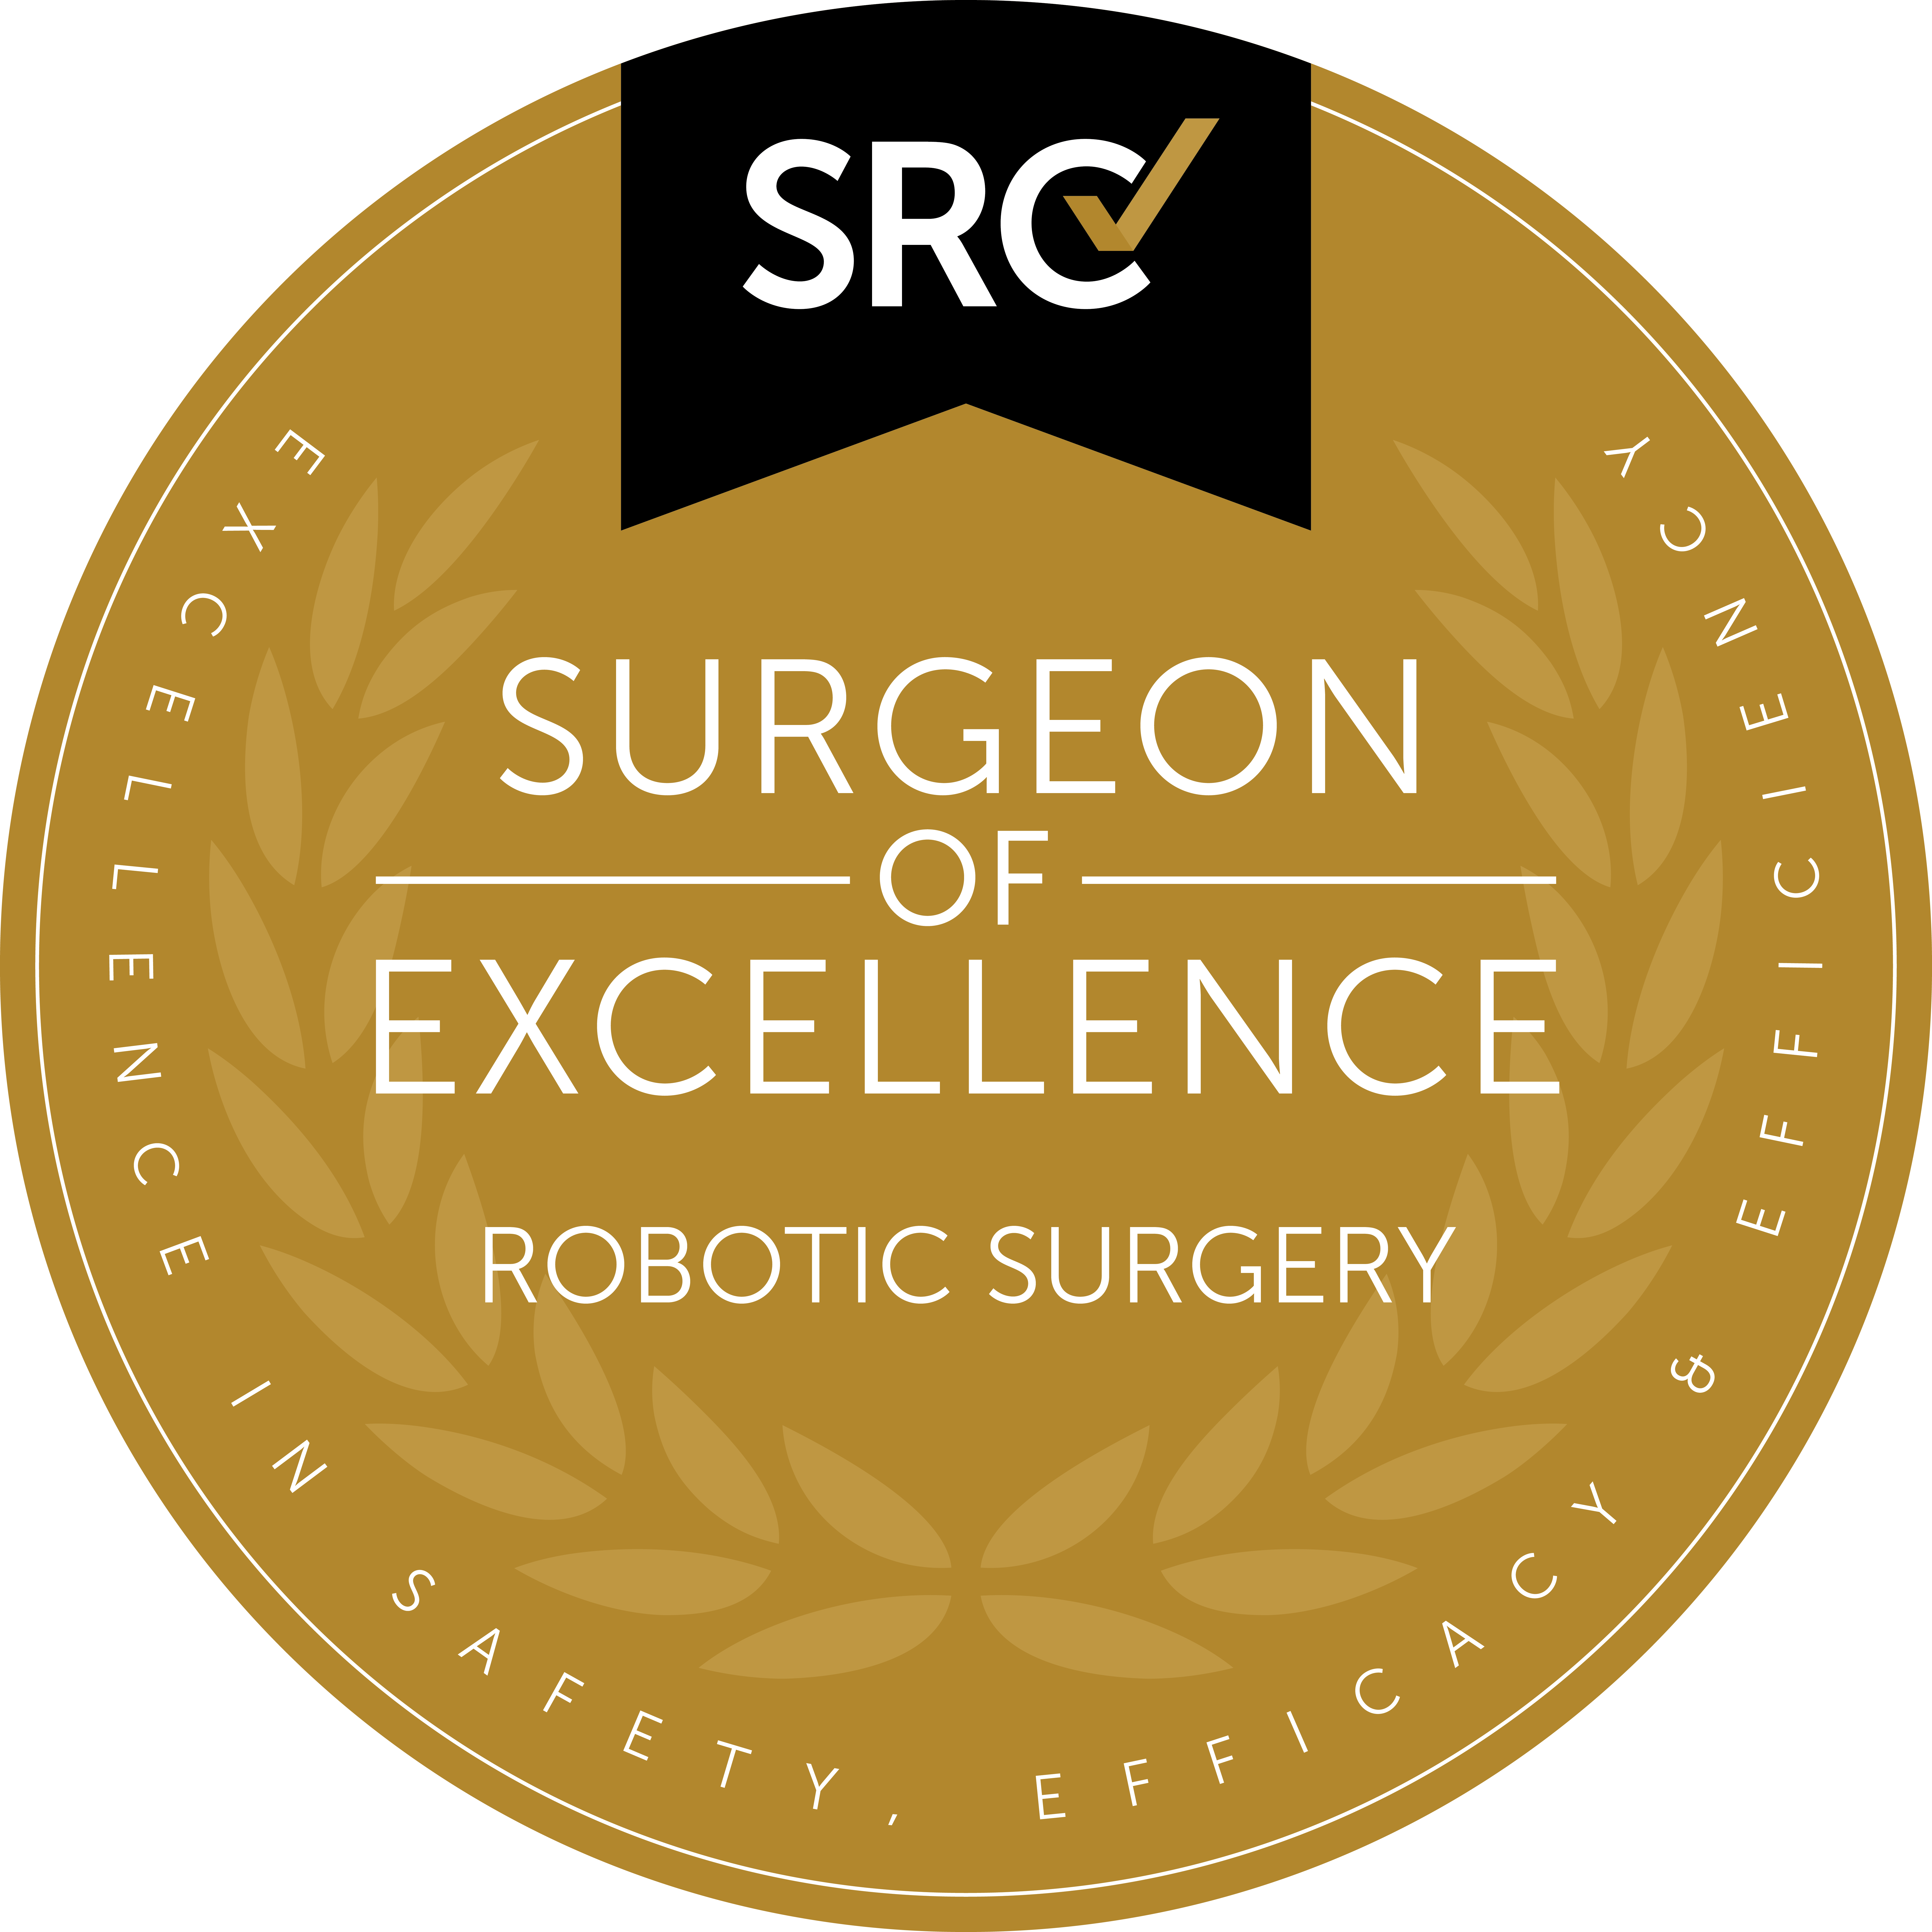 Surgeon of excellence robotic